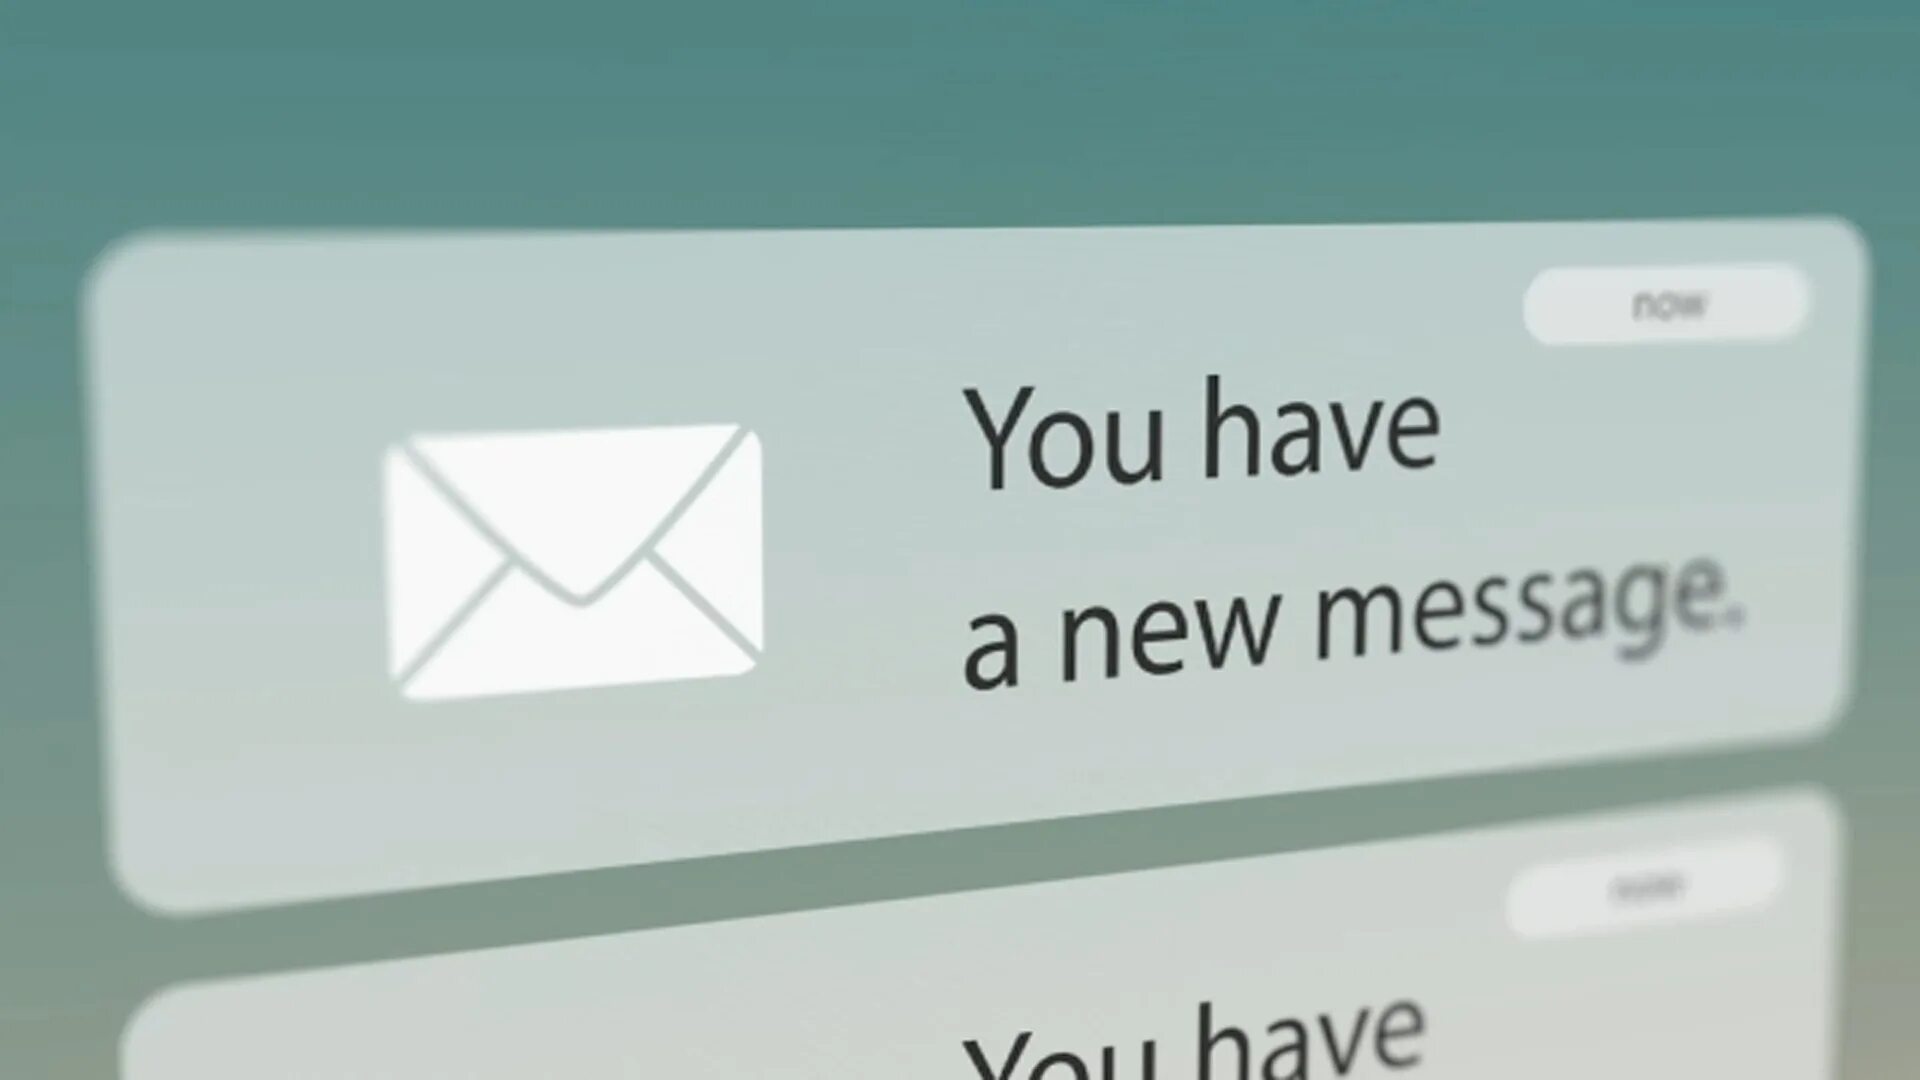 New message. Notification message. New message icon. 1 new message